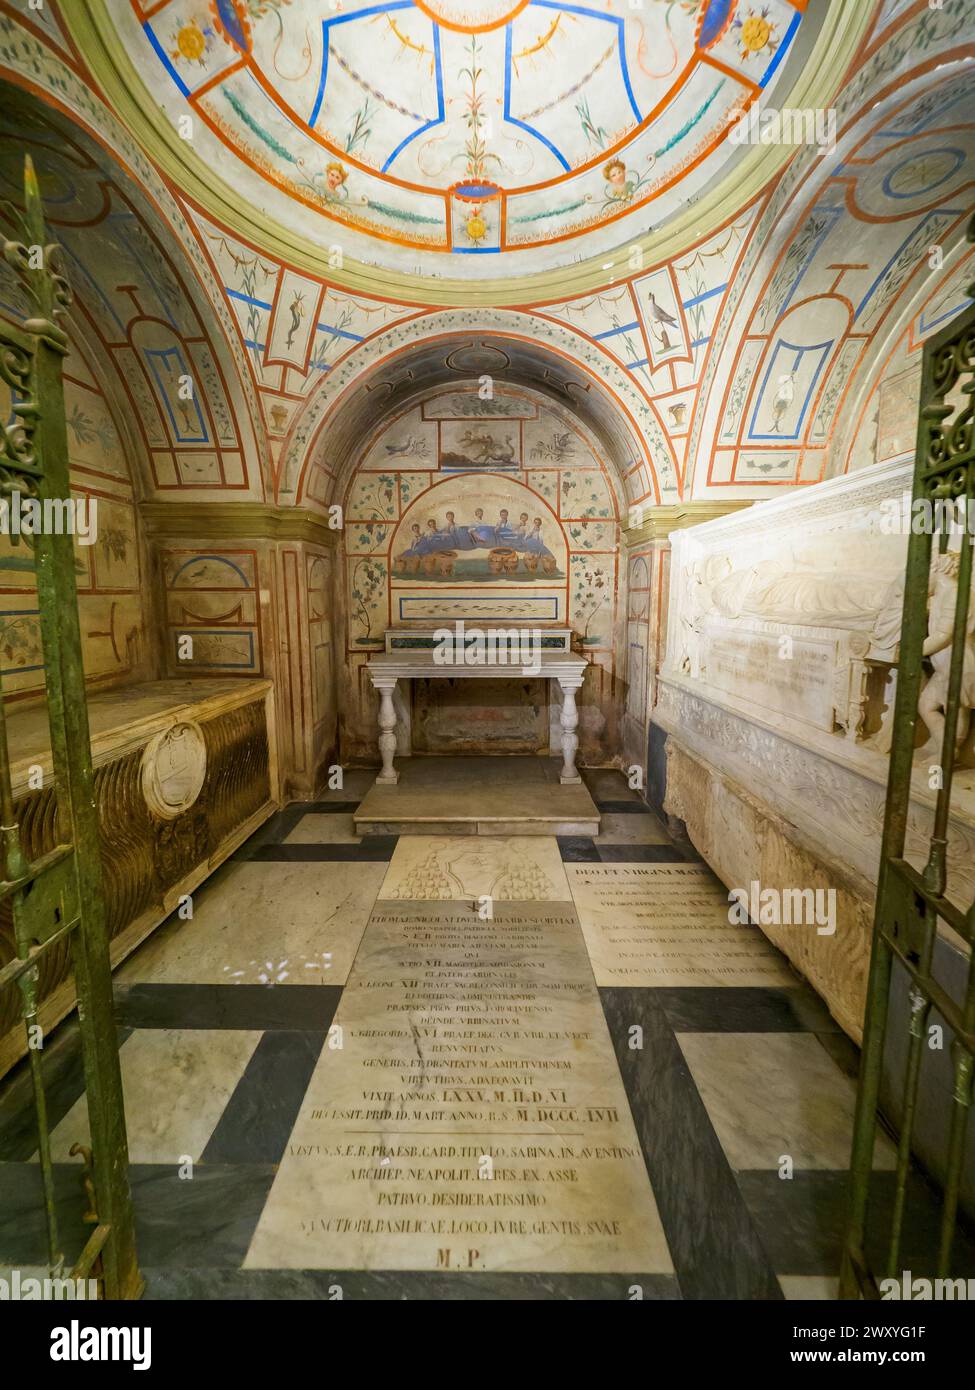 The vast crypt under the main altar,  built by Luigi Carimini in 1869-71 bringing together, in addition to the remains of the titular apostles Philip and James, the relics of various other martyrs that came to light during these excavations, and the tombs of two of Riario who once had the right to burial at the presbytery. The tempera decorations of the ambulatory are inspired by those of the catacombs of San Callisto and Domitilla. - Basilica dei Santi XII Apostoli - Rome Italy Stock Photo